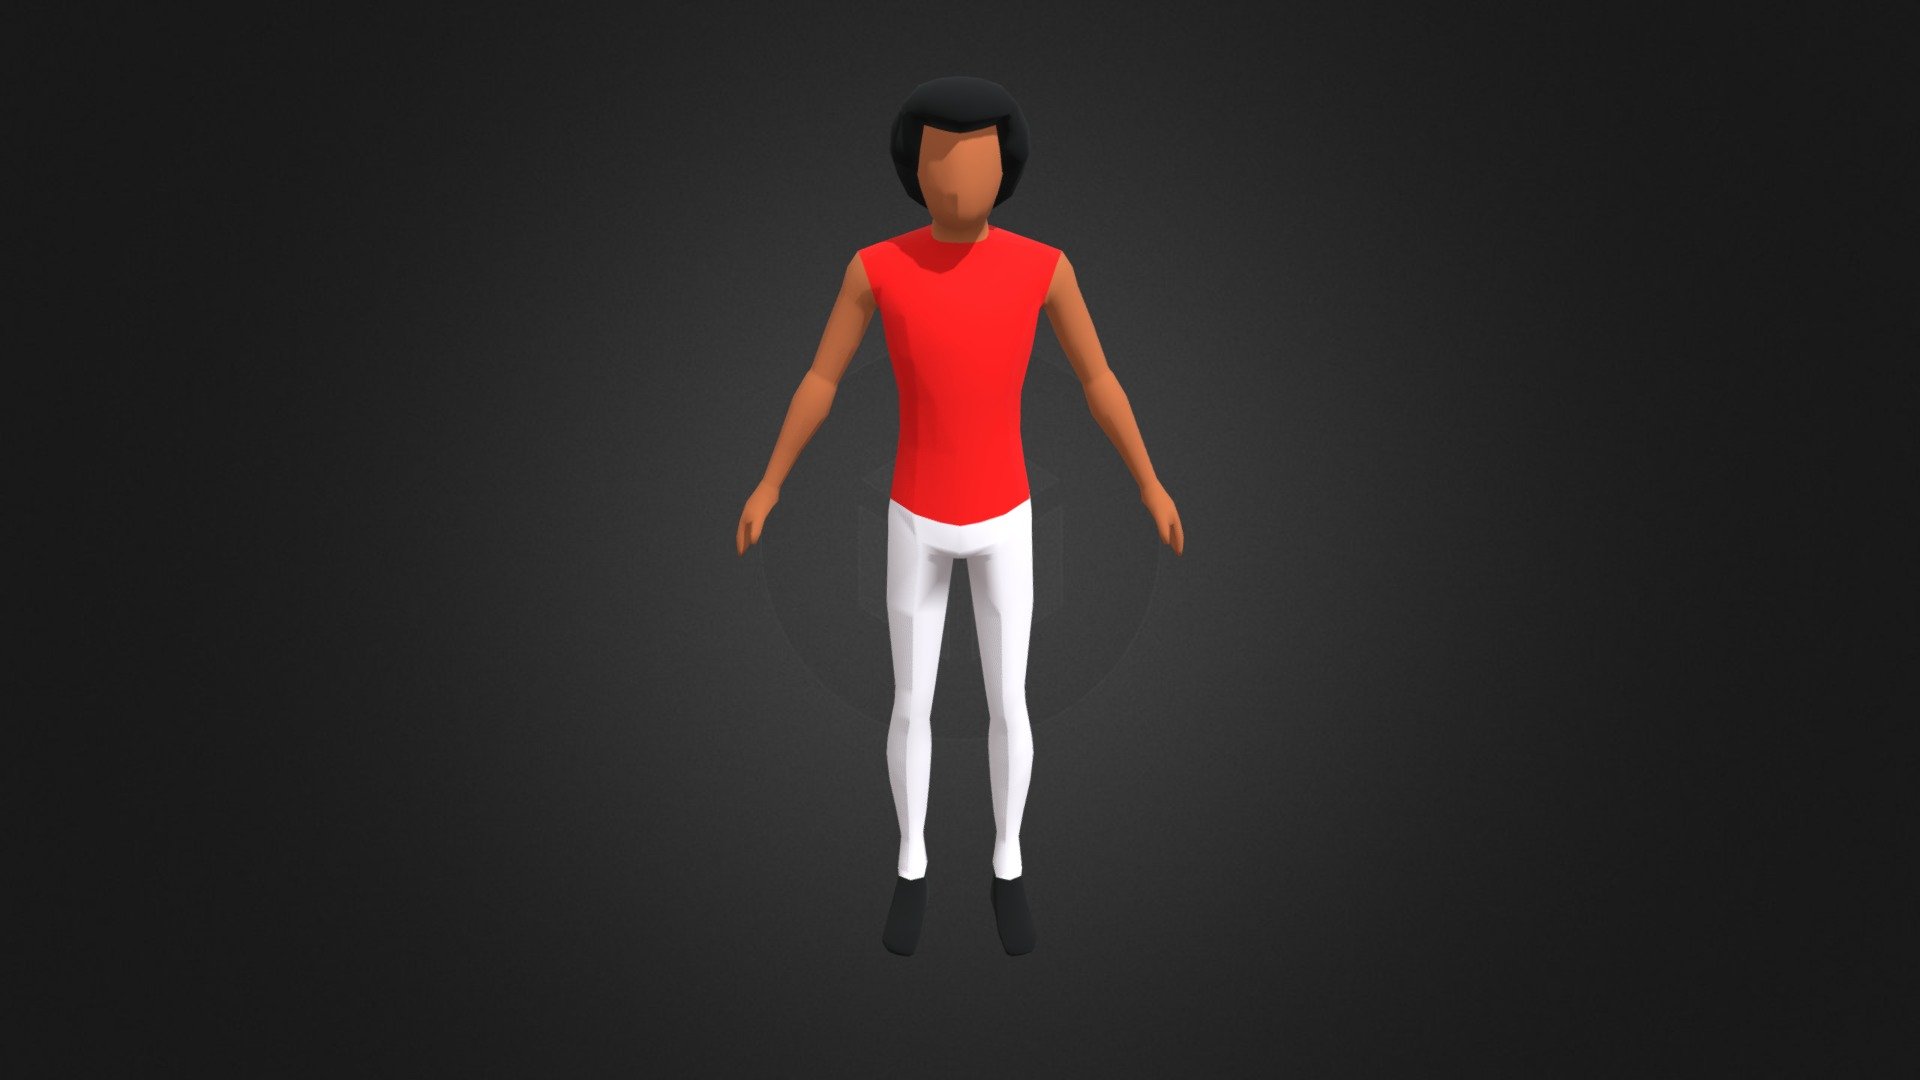 A low poly character for the game &ldquo;Muvuca - Lost n' Crowd